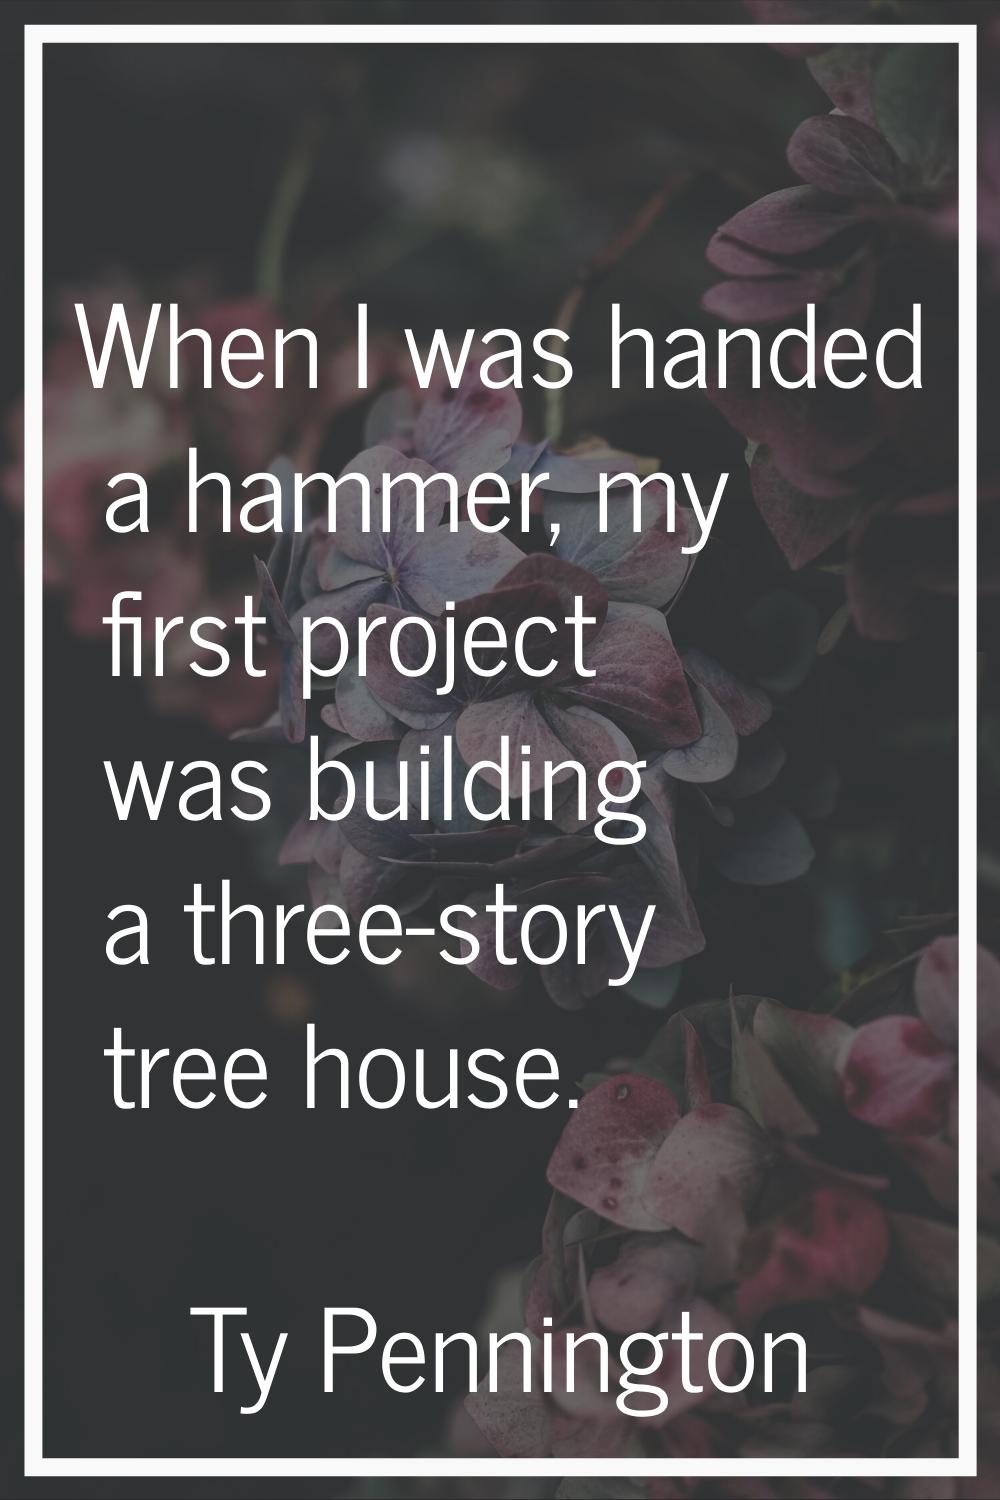 When I was handed a hammer, my first project was building a three-story tree house.